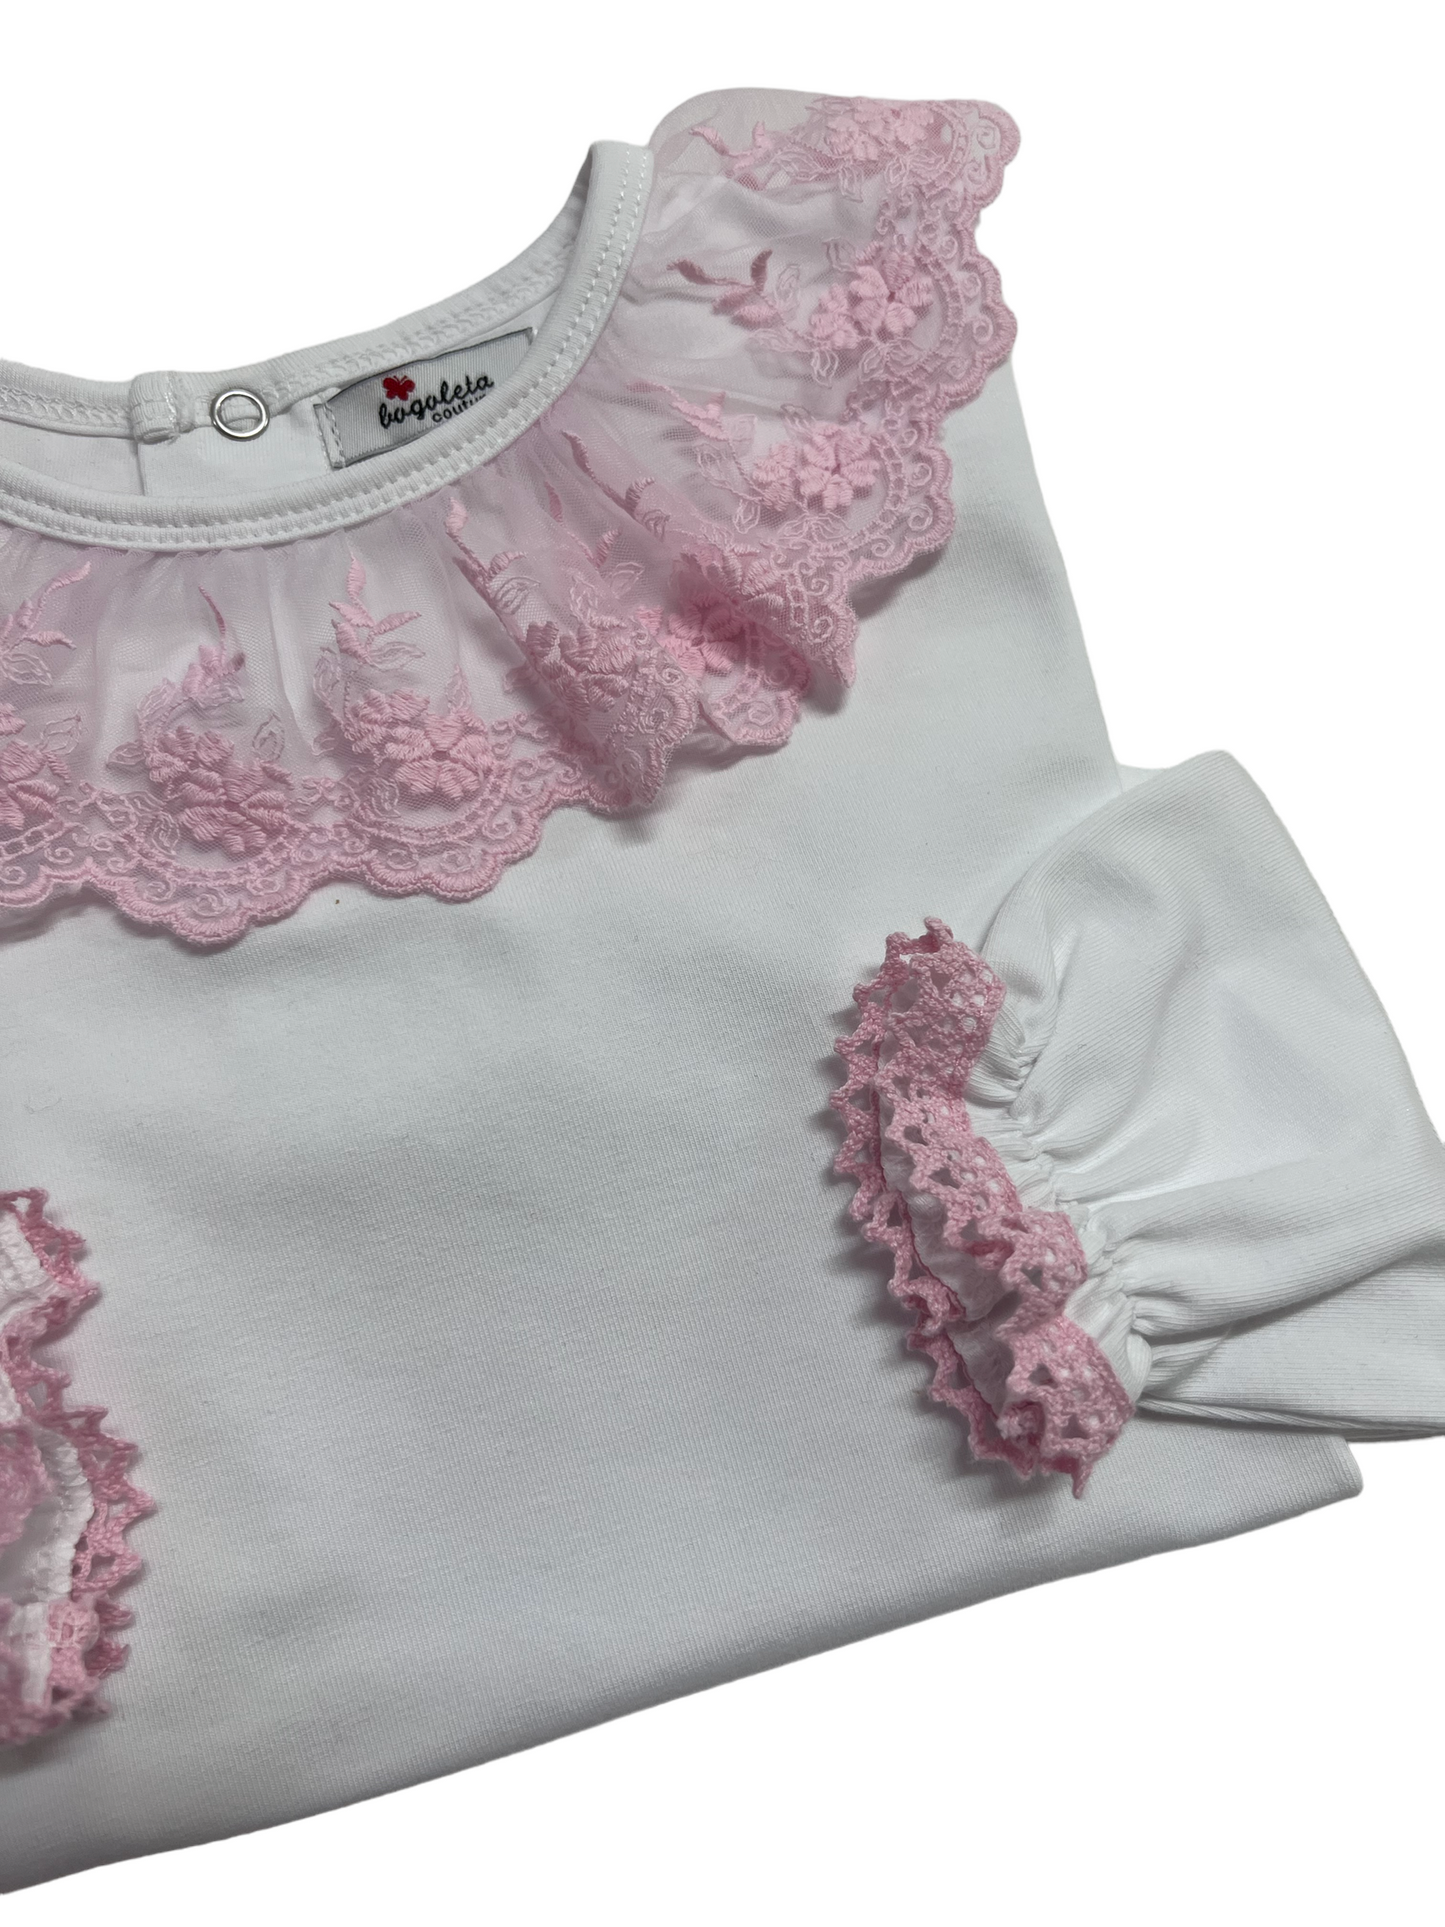 Victorian baby lace sweater - Marshmallow